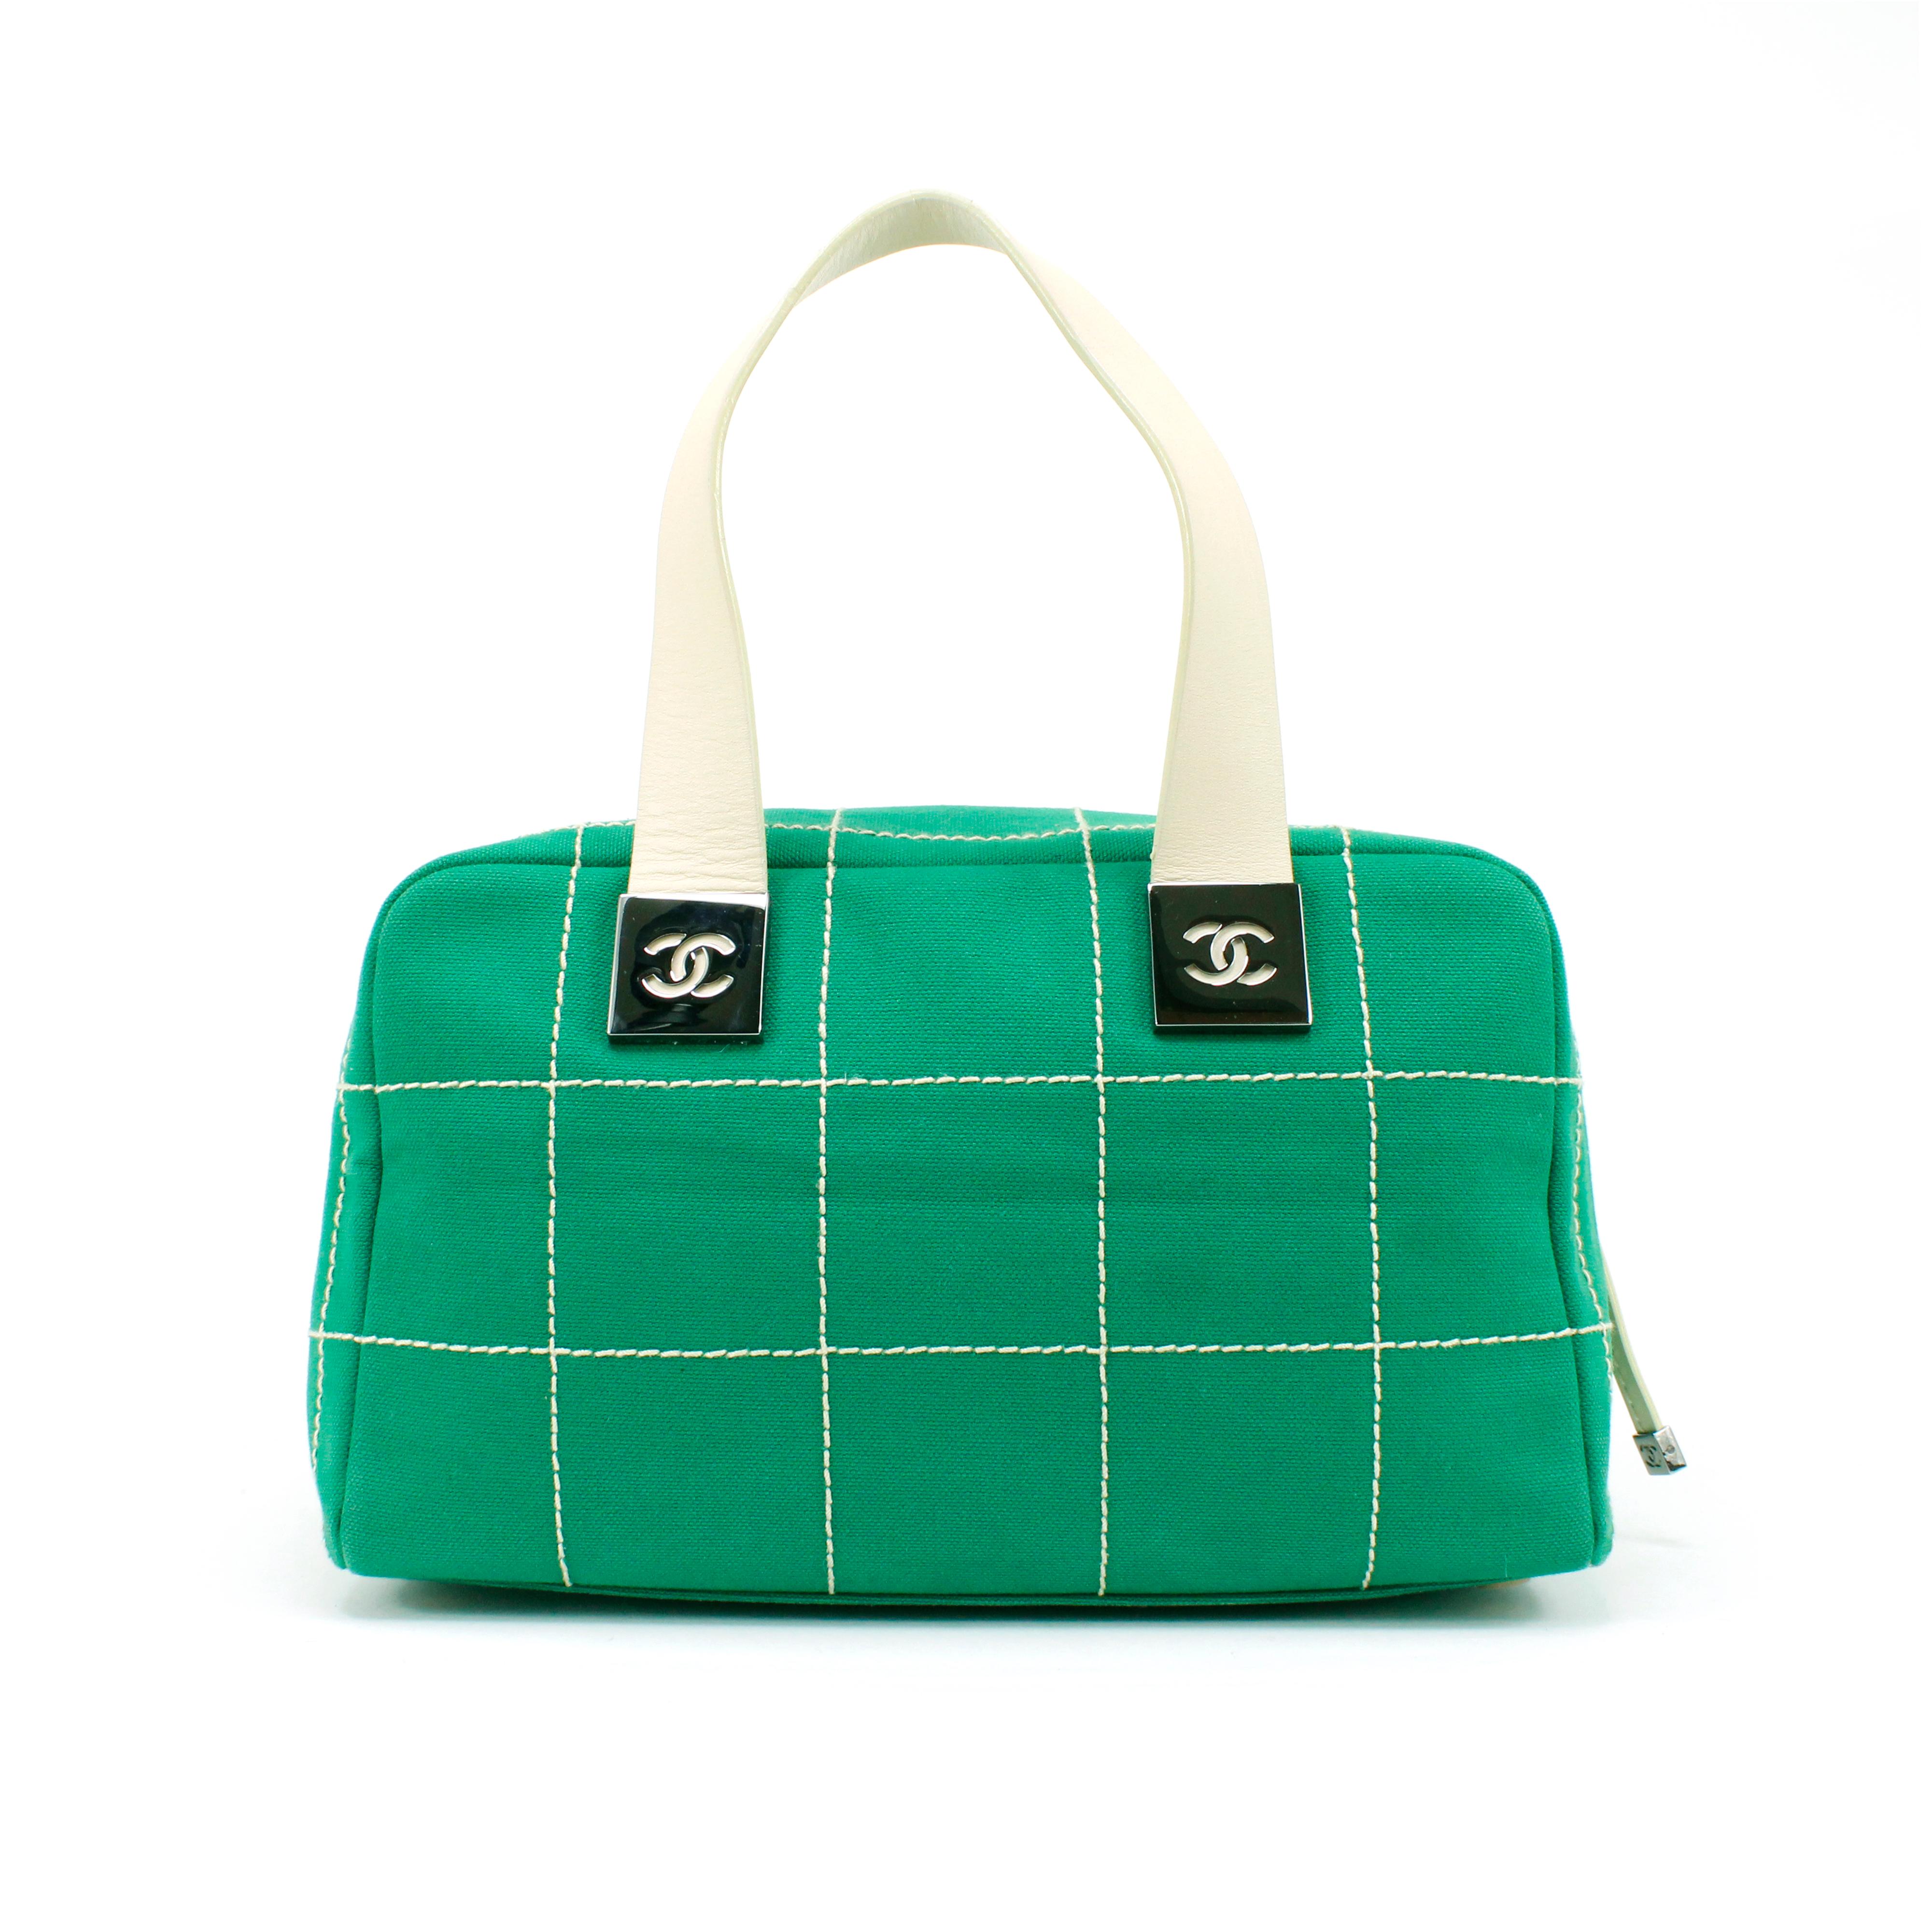 Chanel bag, in green fabric + white leather, silver hardware. 

Condition: 
Good.

Measurements: 
Width: 28 cm 
Height: 16.5 cm 
Depth: 17.5 cm